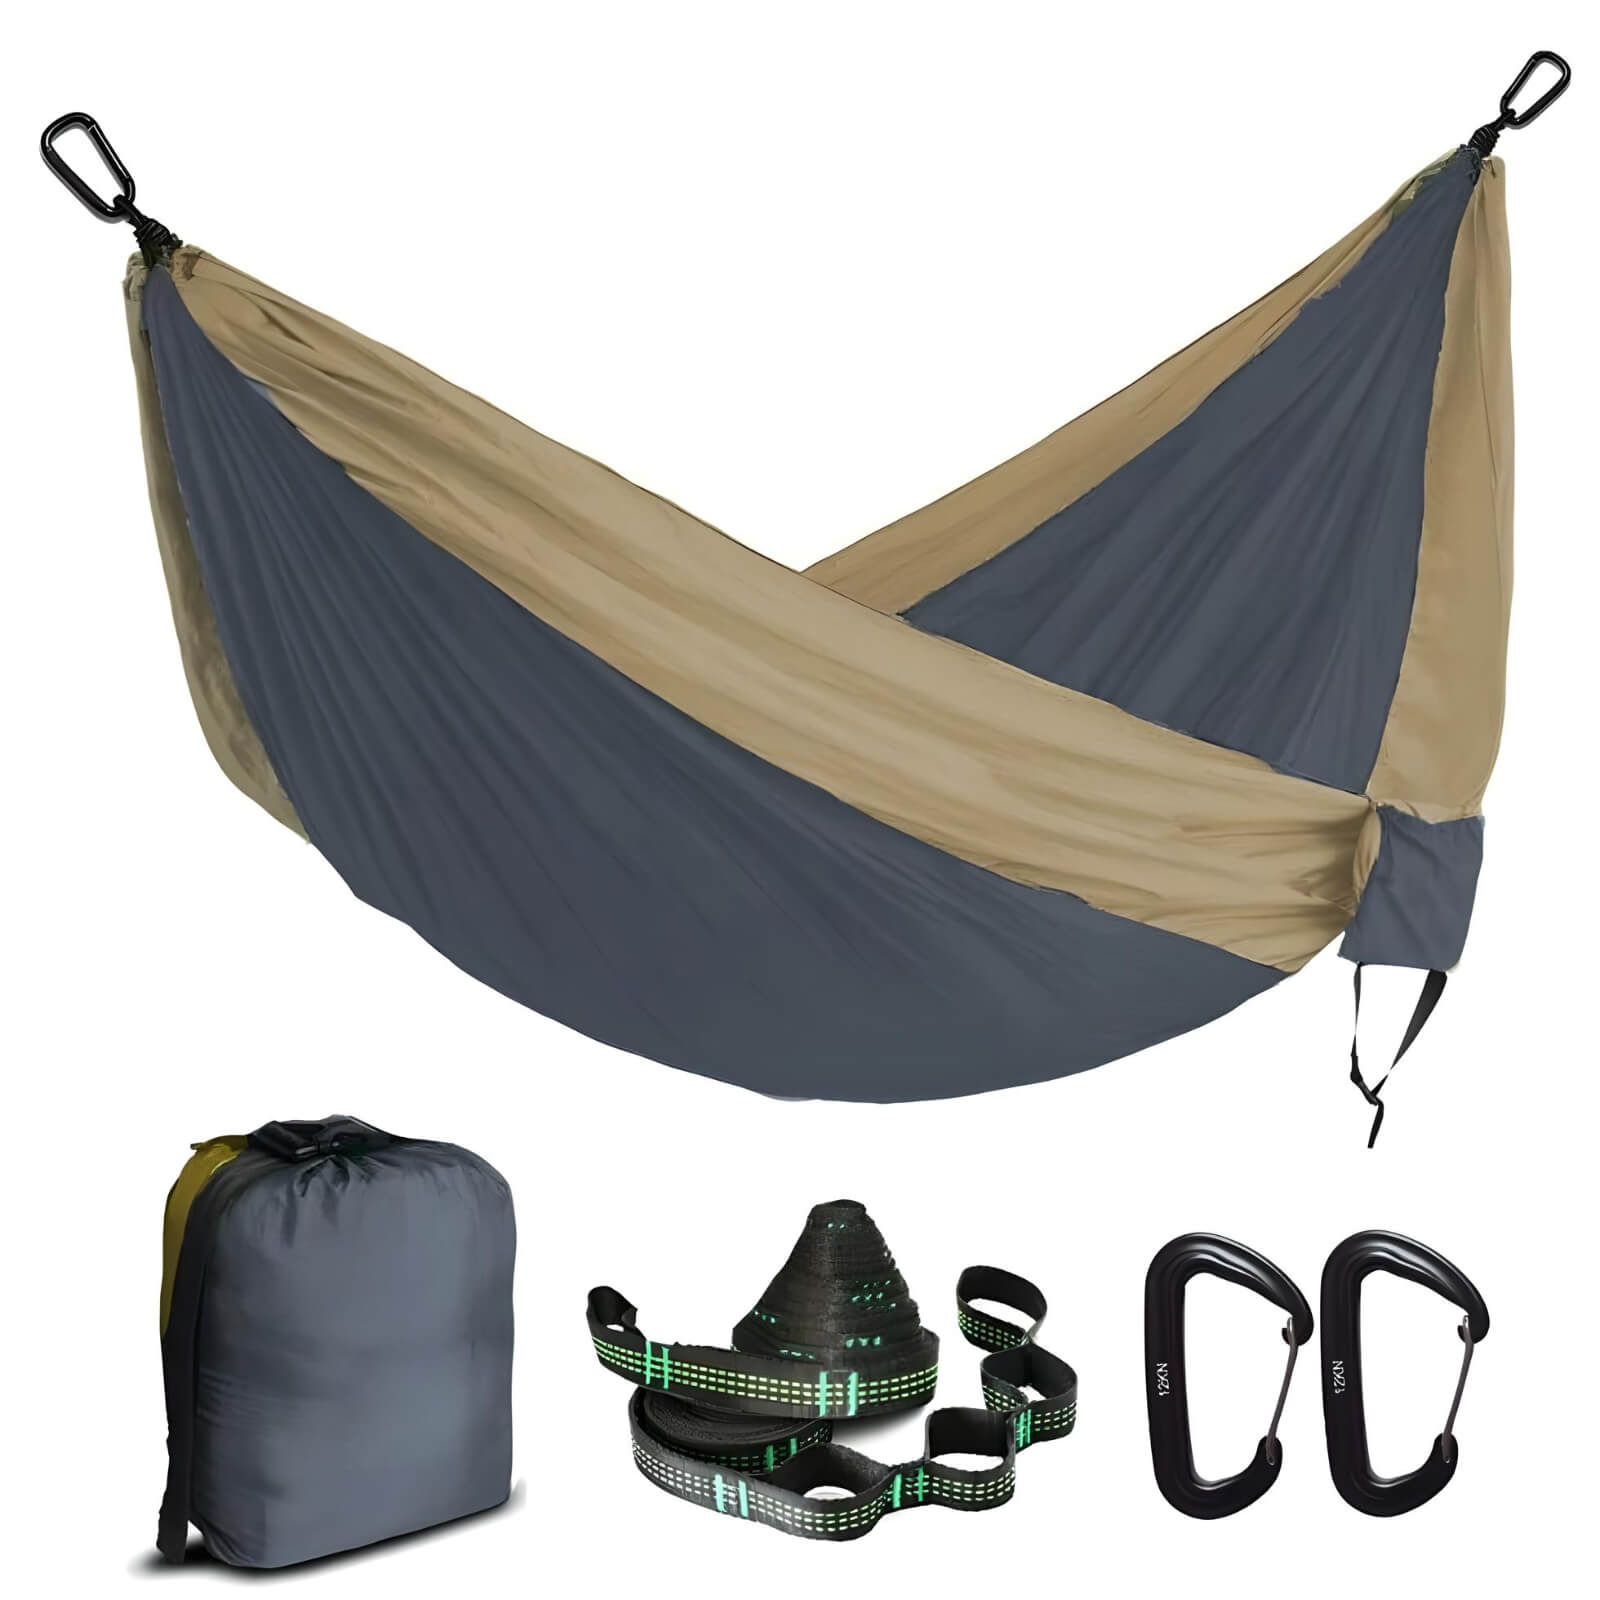 kids-camping-hammock-in-Army-Green-and-Khaki